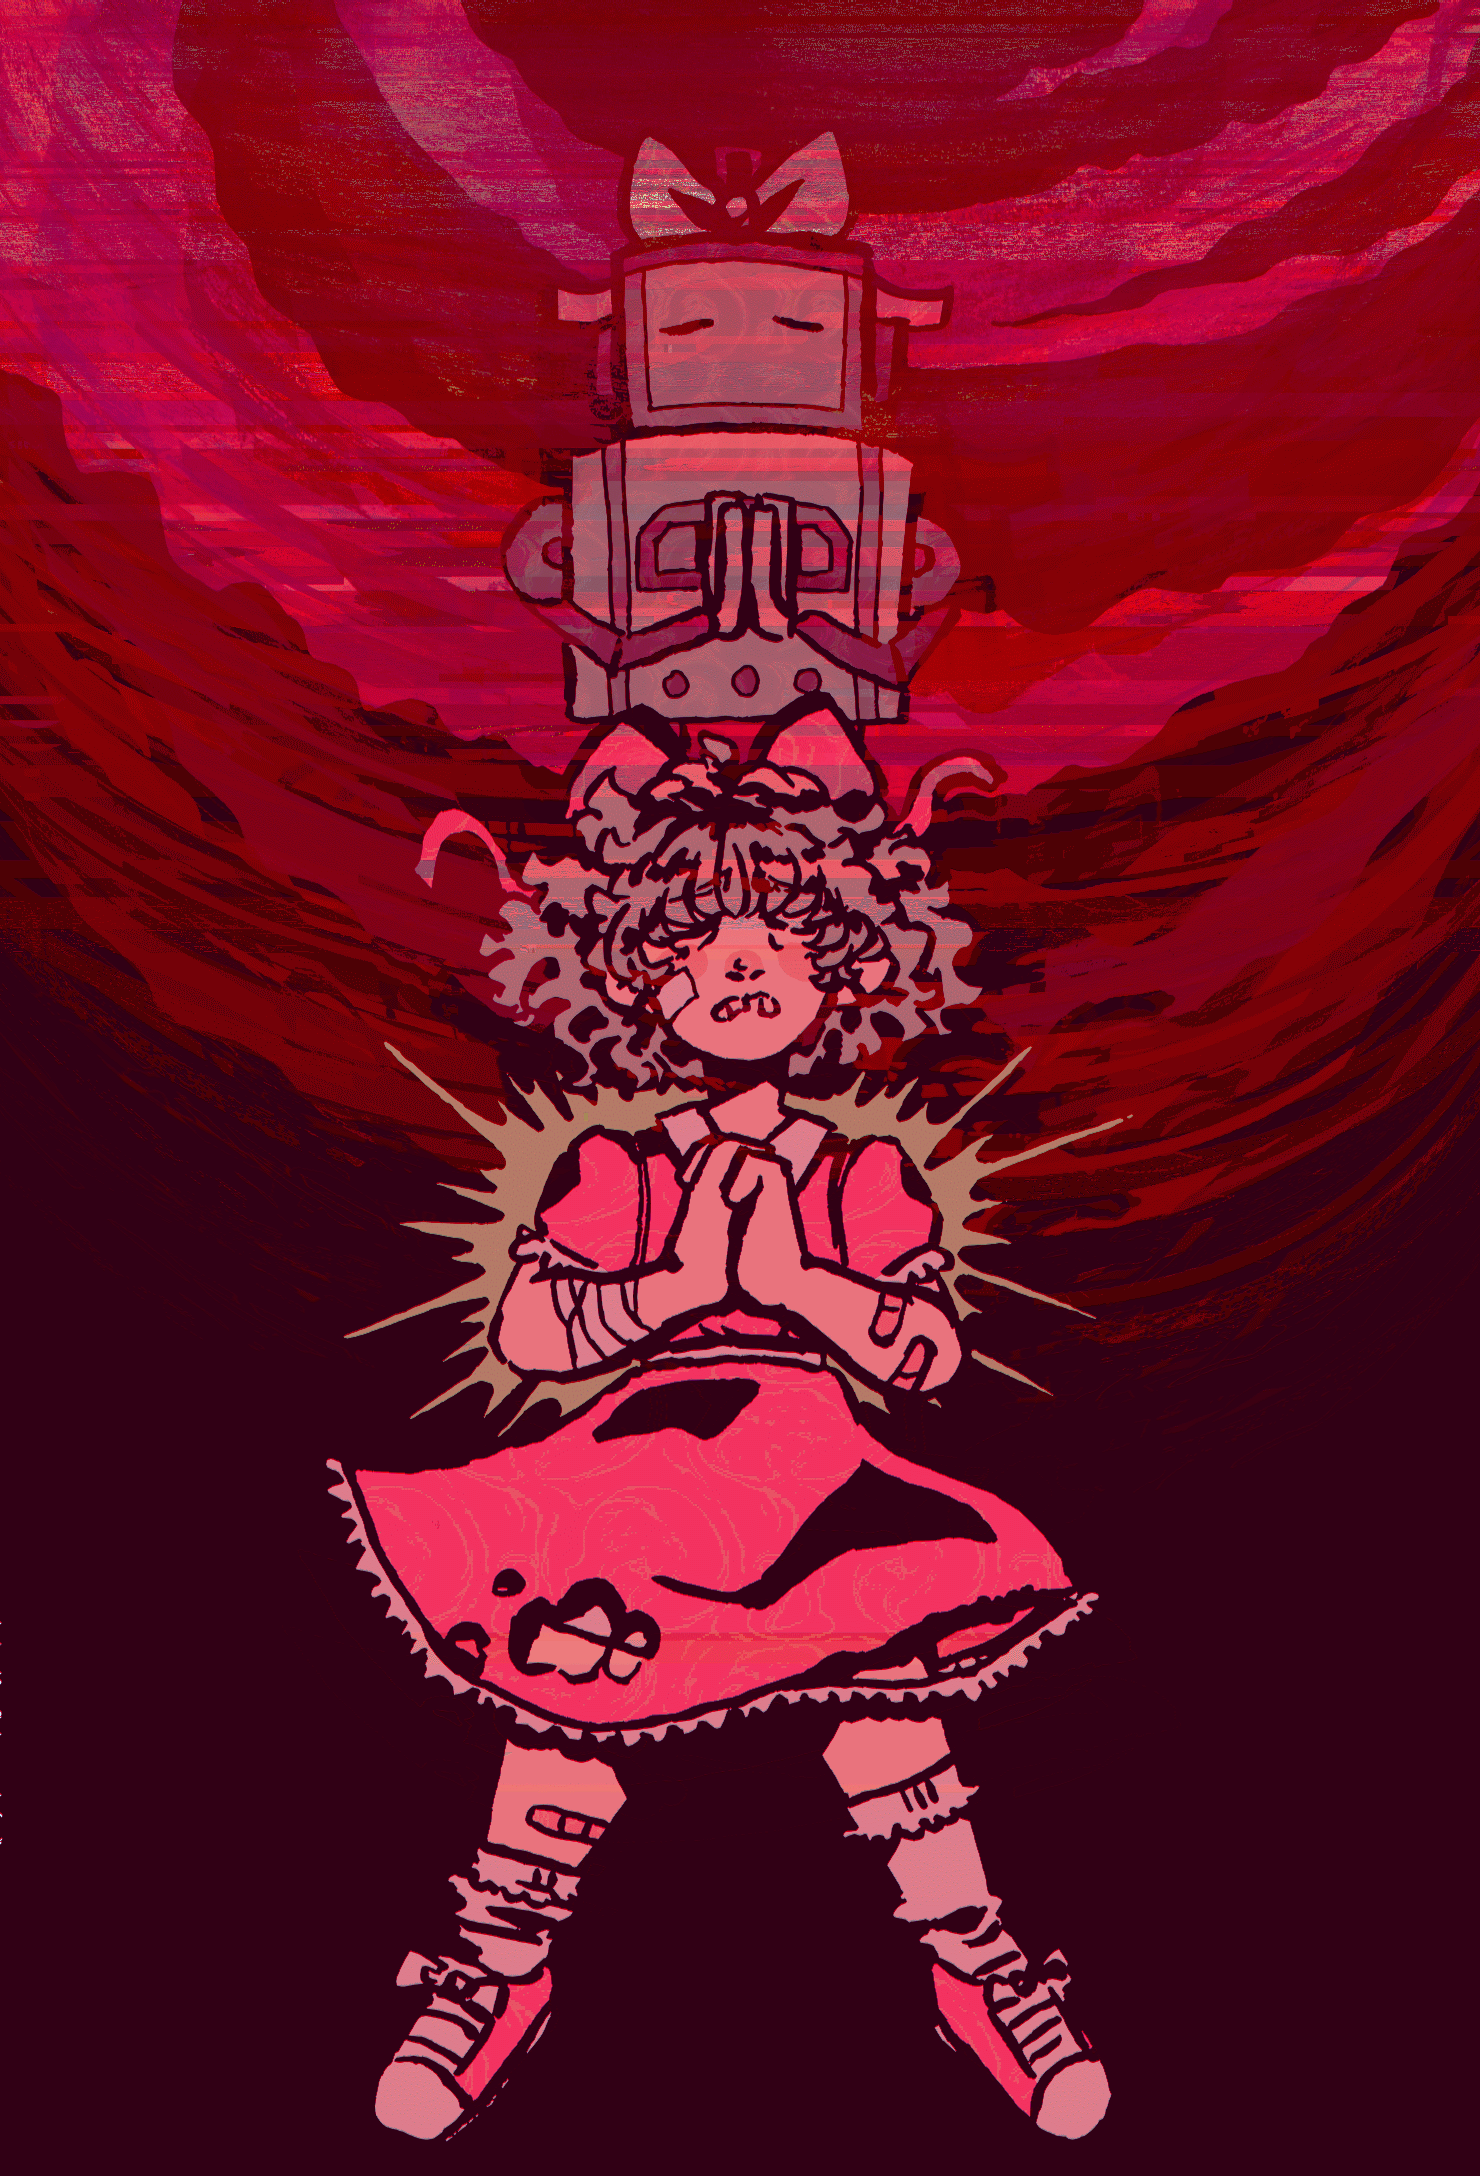 Paula praying at the end of Mother 2